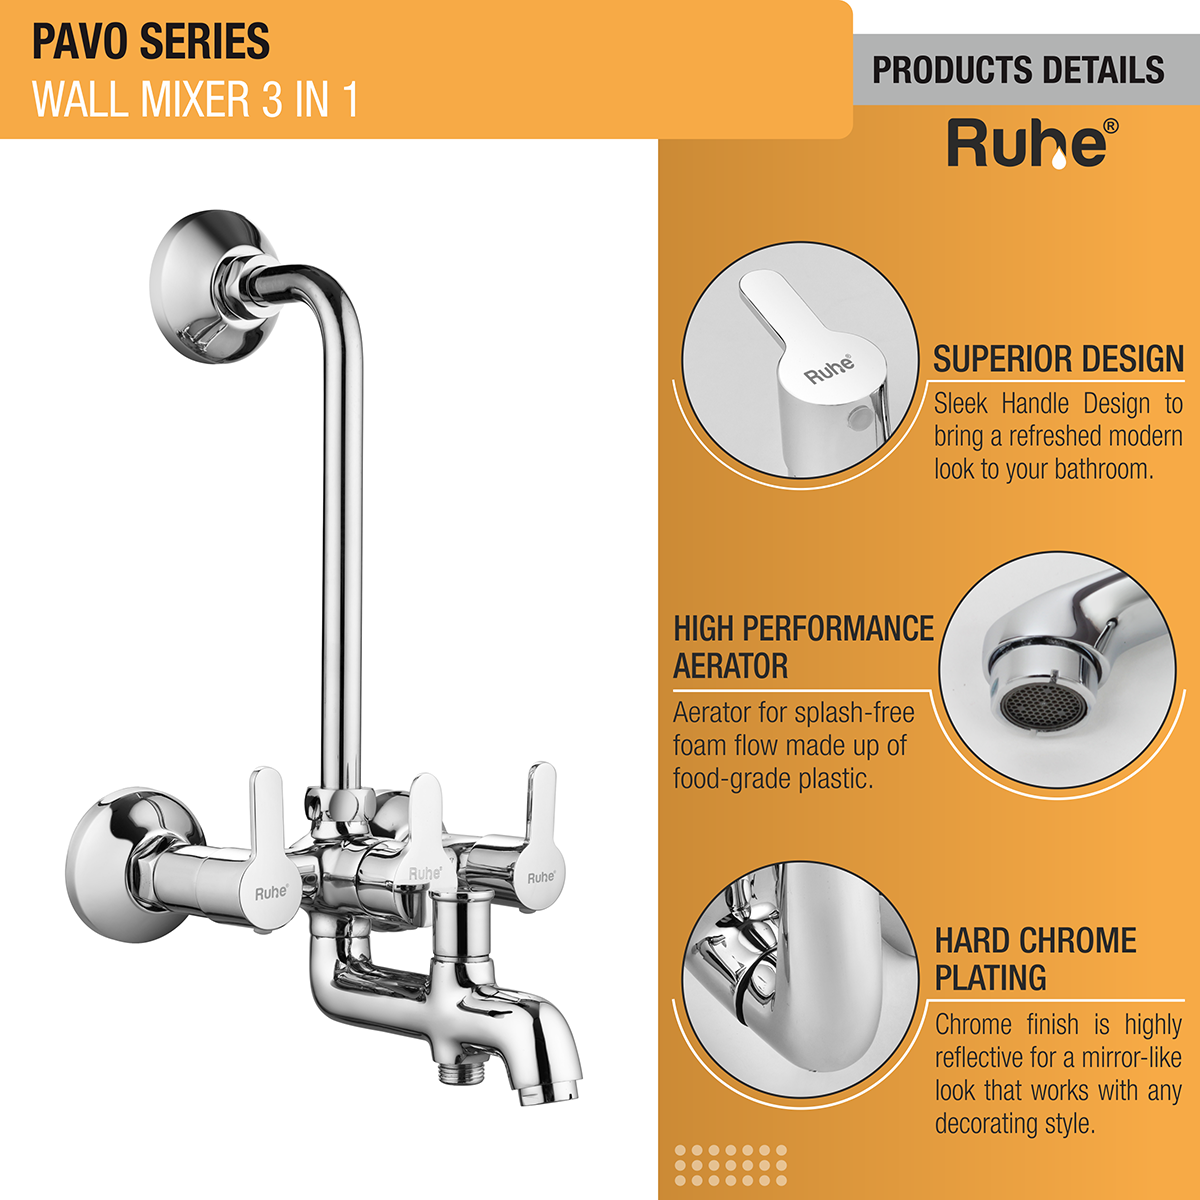 Pavo Wall Mixer 3-in-1 Brass Faucet product details